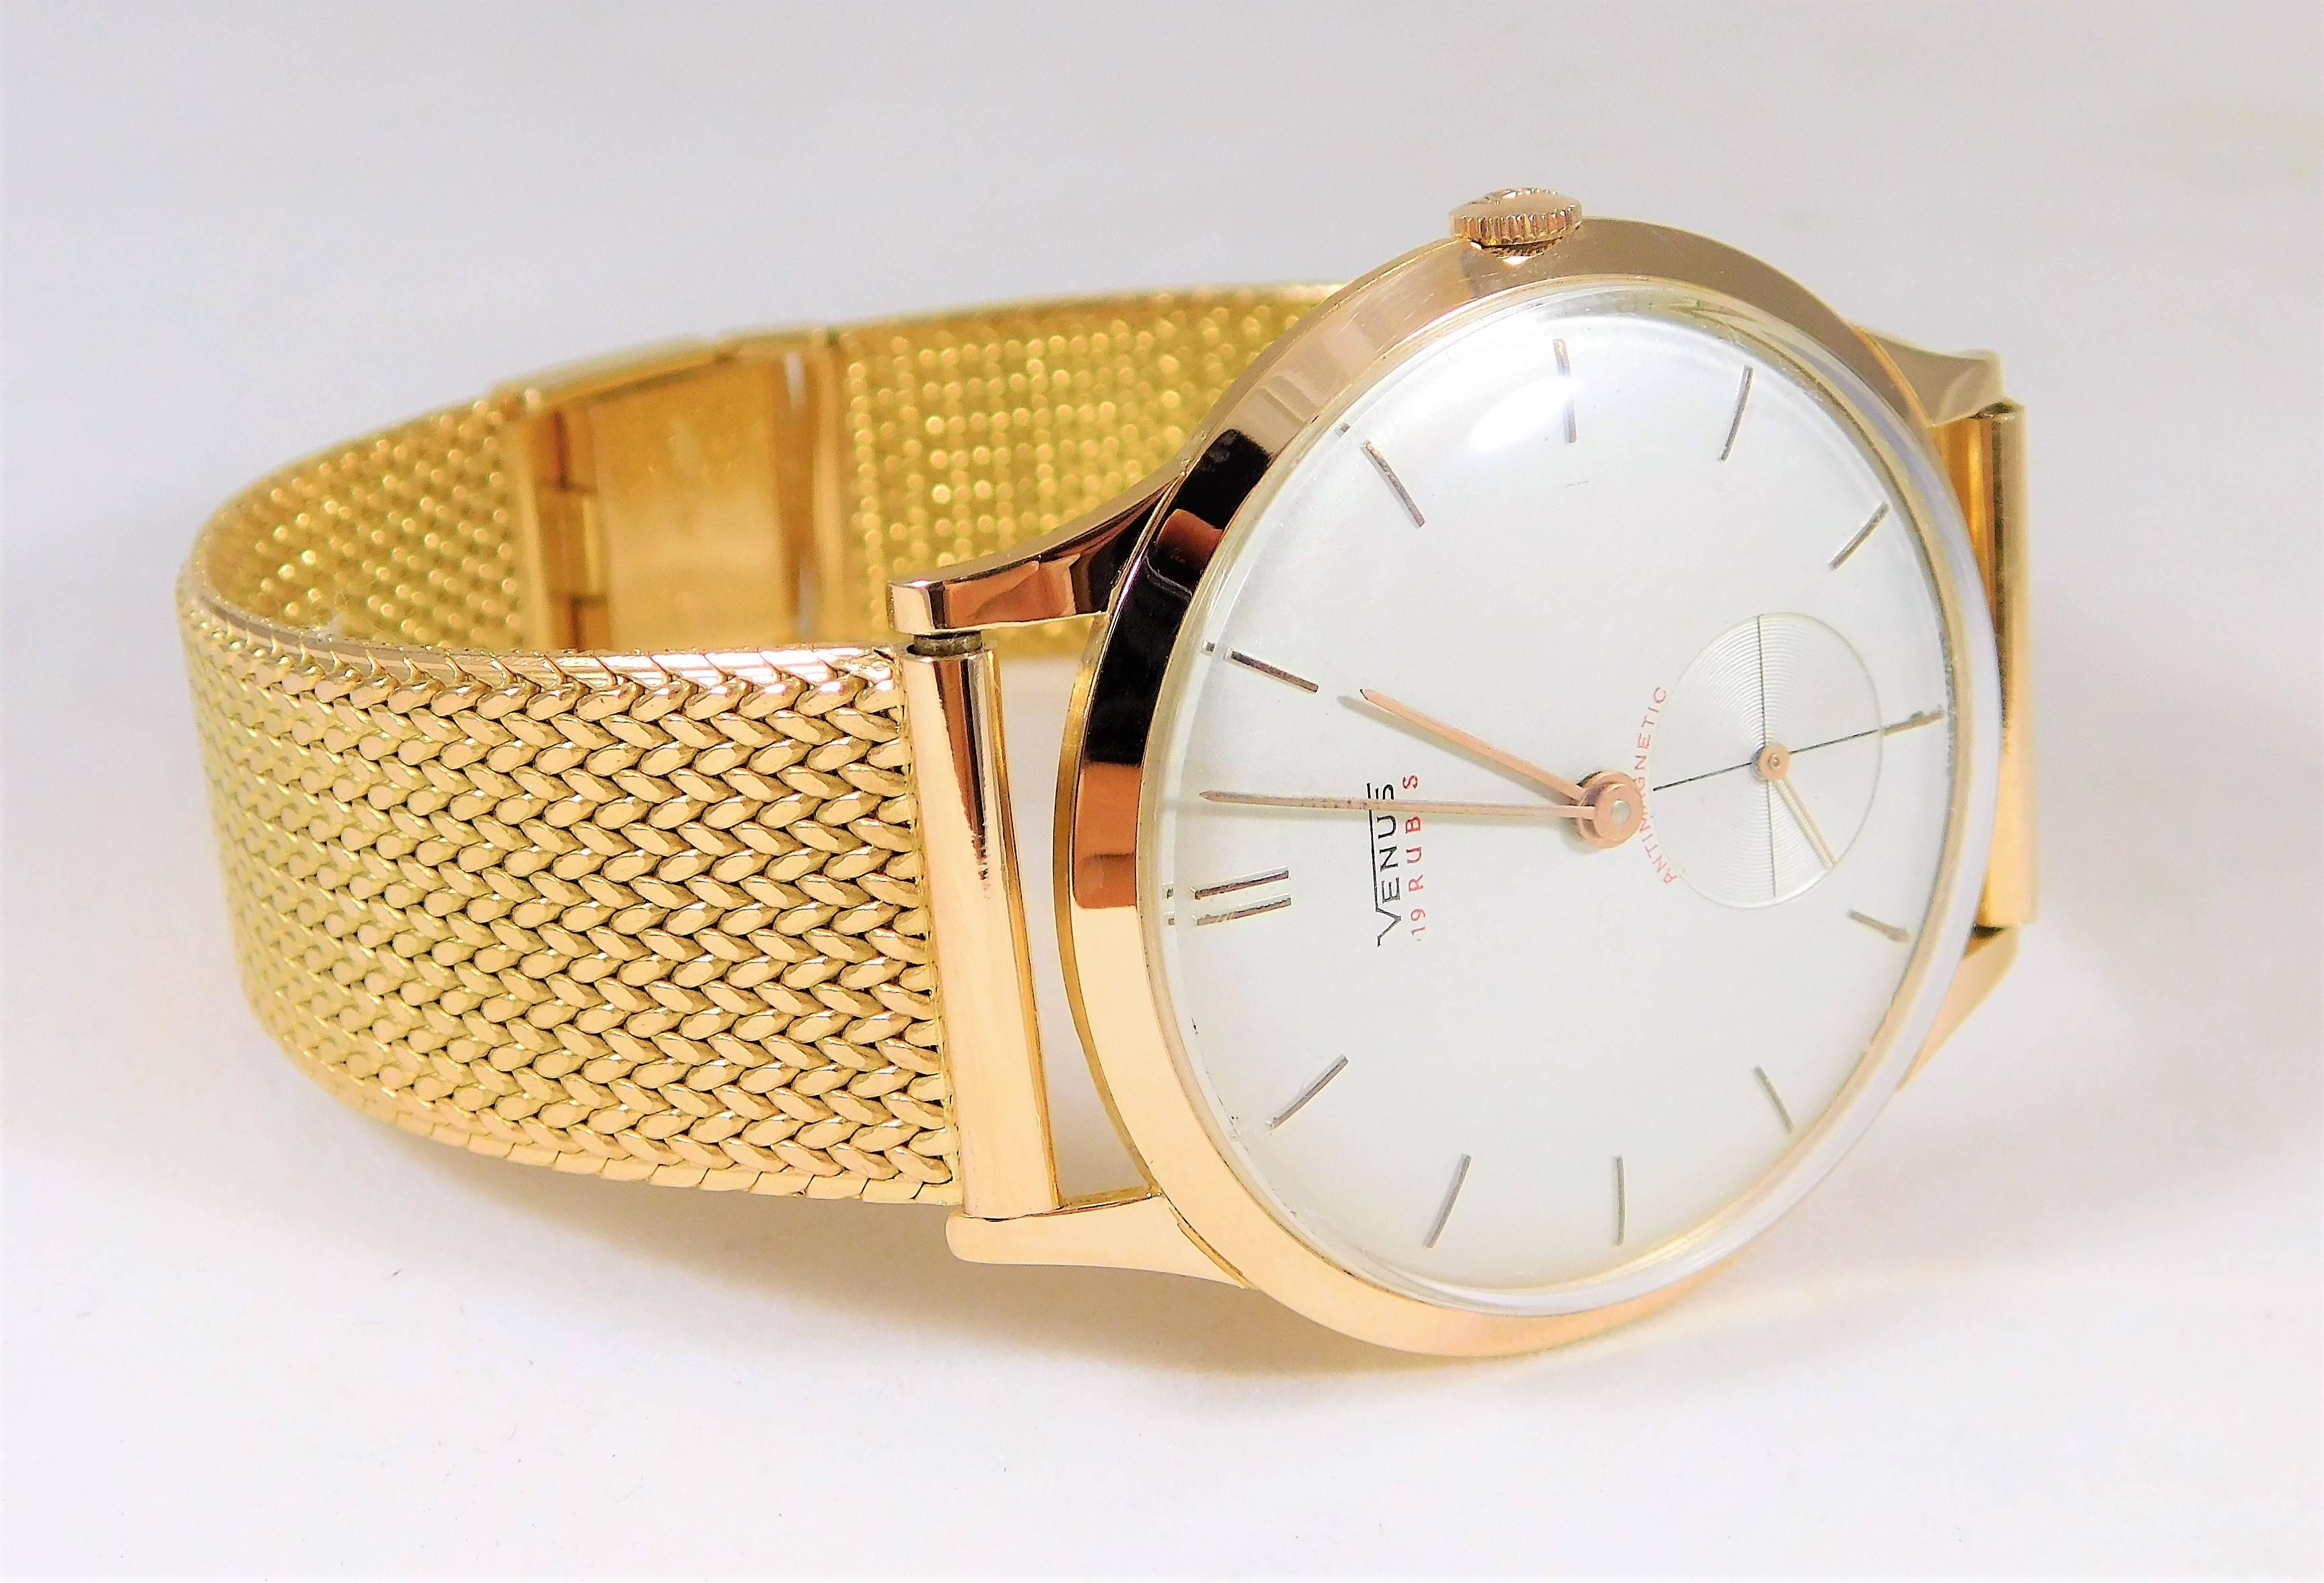 From a dapper Southern gentleman’s estate.  Circa 1970s.  This extremely rare vintage gentleman’s 18k gold Venus luxury timepiece is a watch collector's dream.  You will be hard pressed finding its equal anywhere. Founded in La Chaux-de-Fonds,